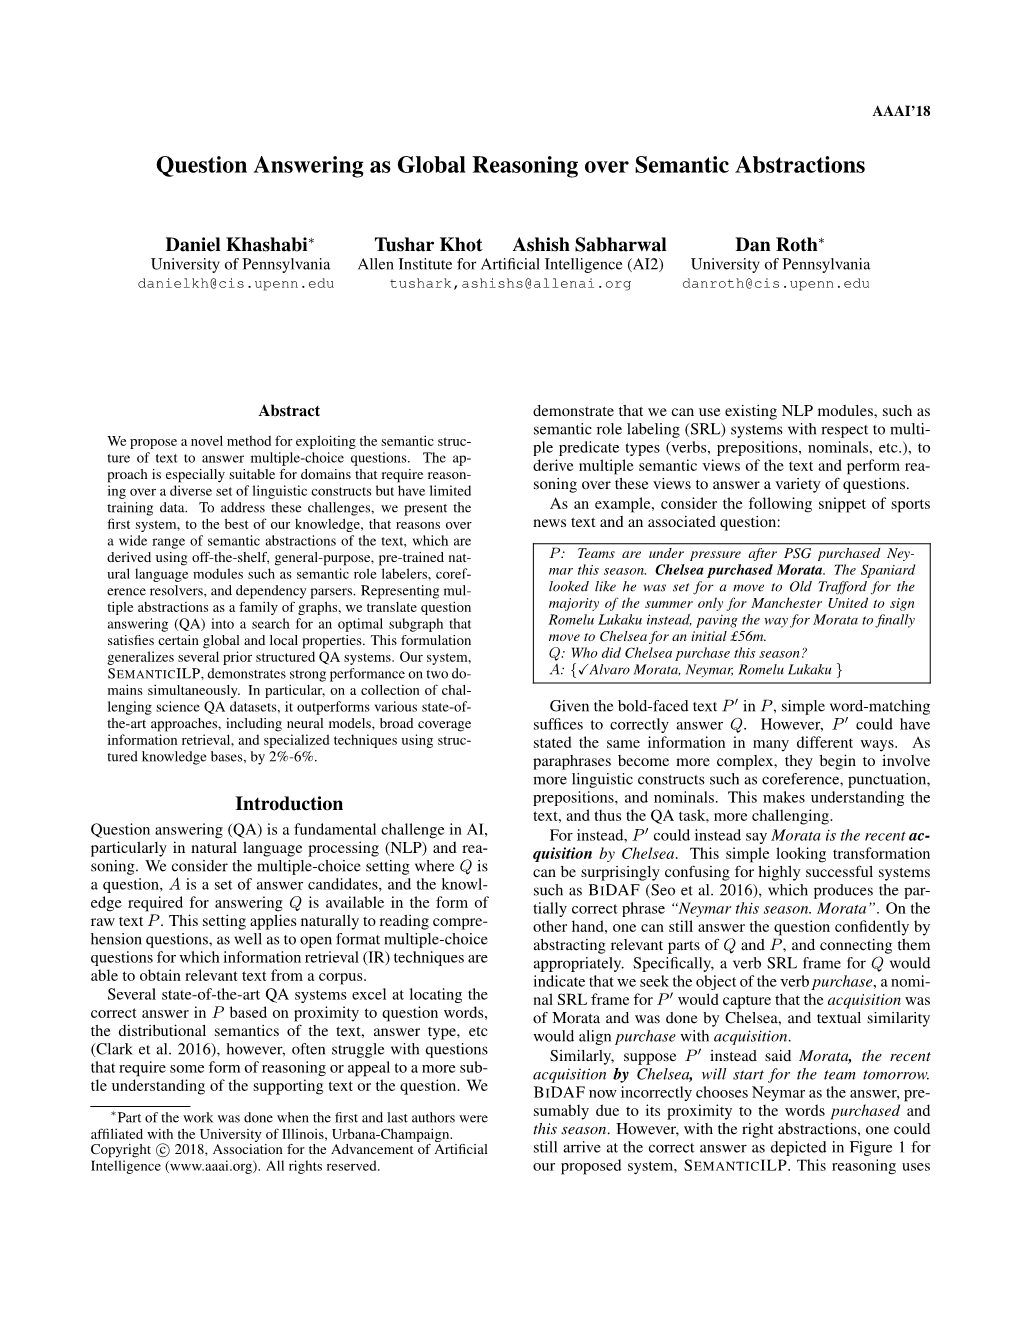 Question Answering As Global Reasoning Over Semantic Abstractions